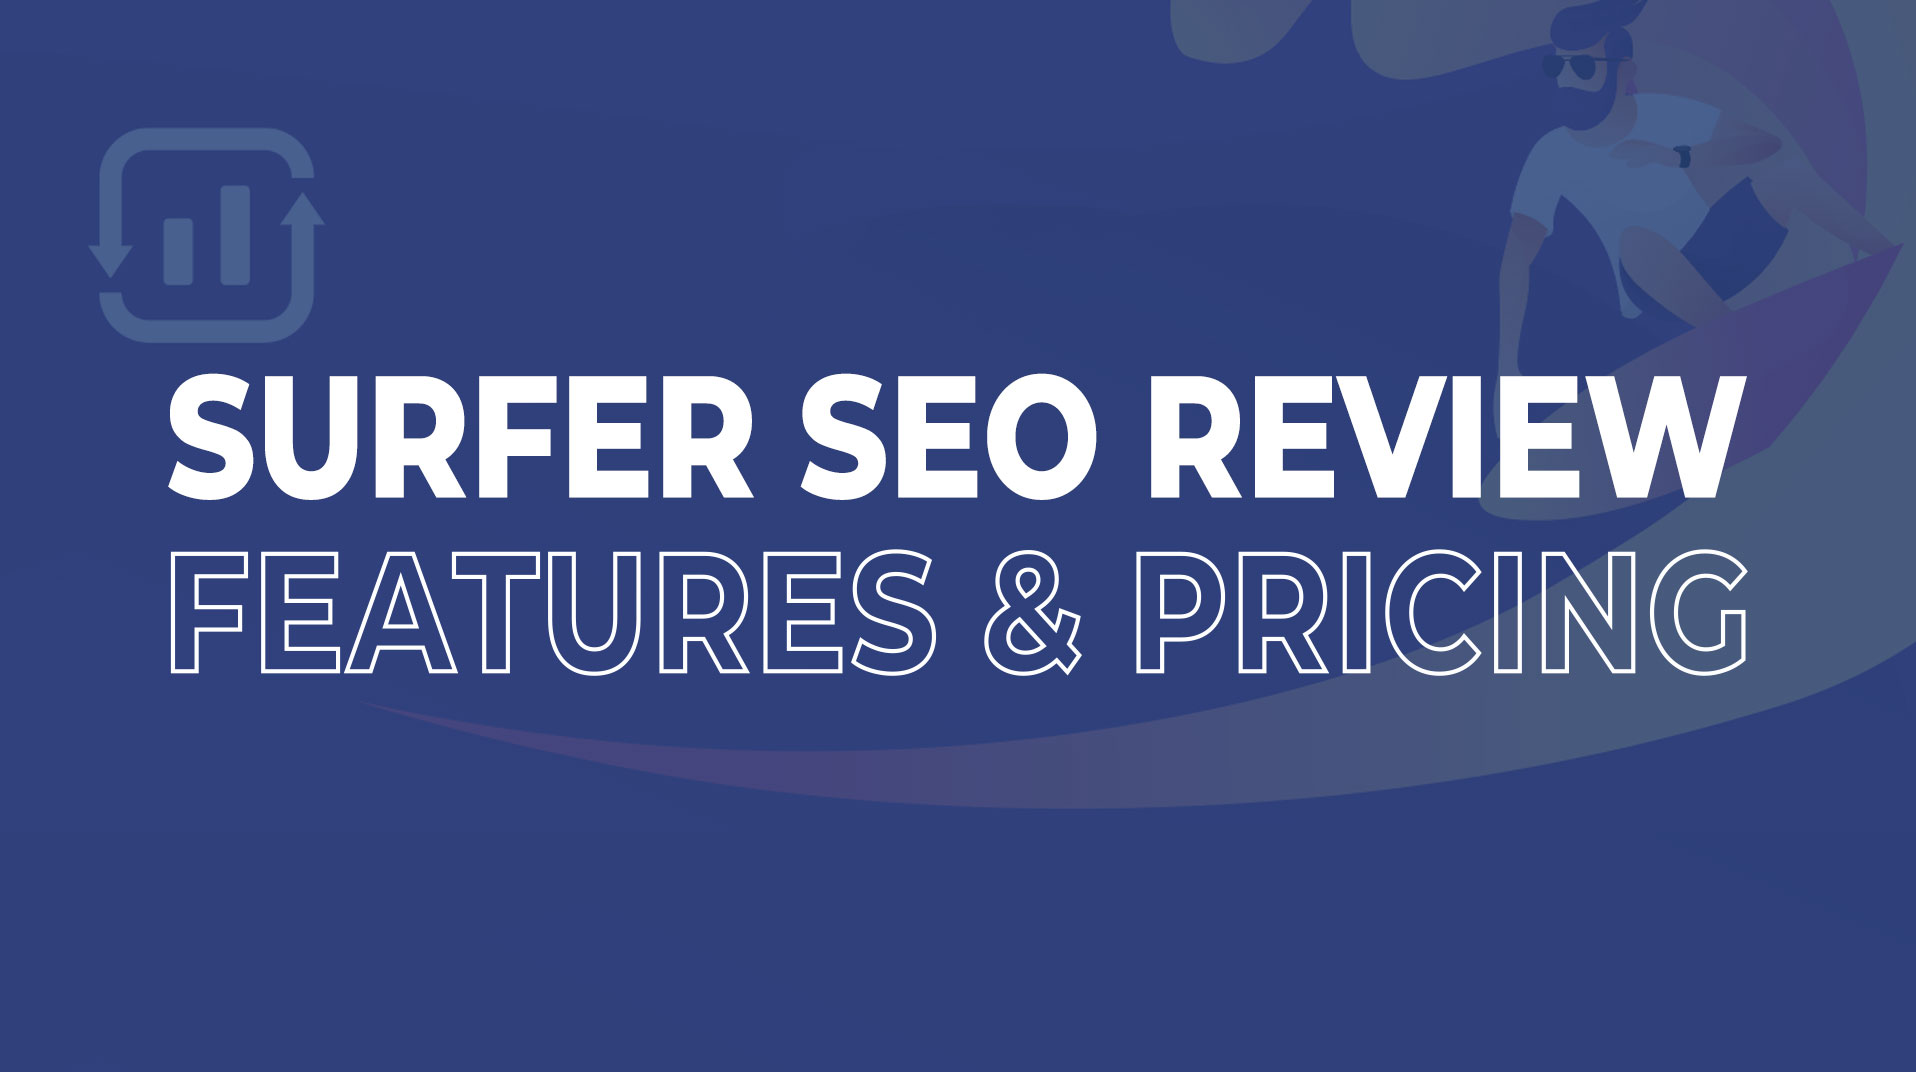 Surfer SEO Review – Features, Pricing & More